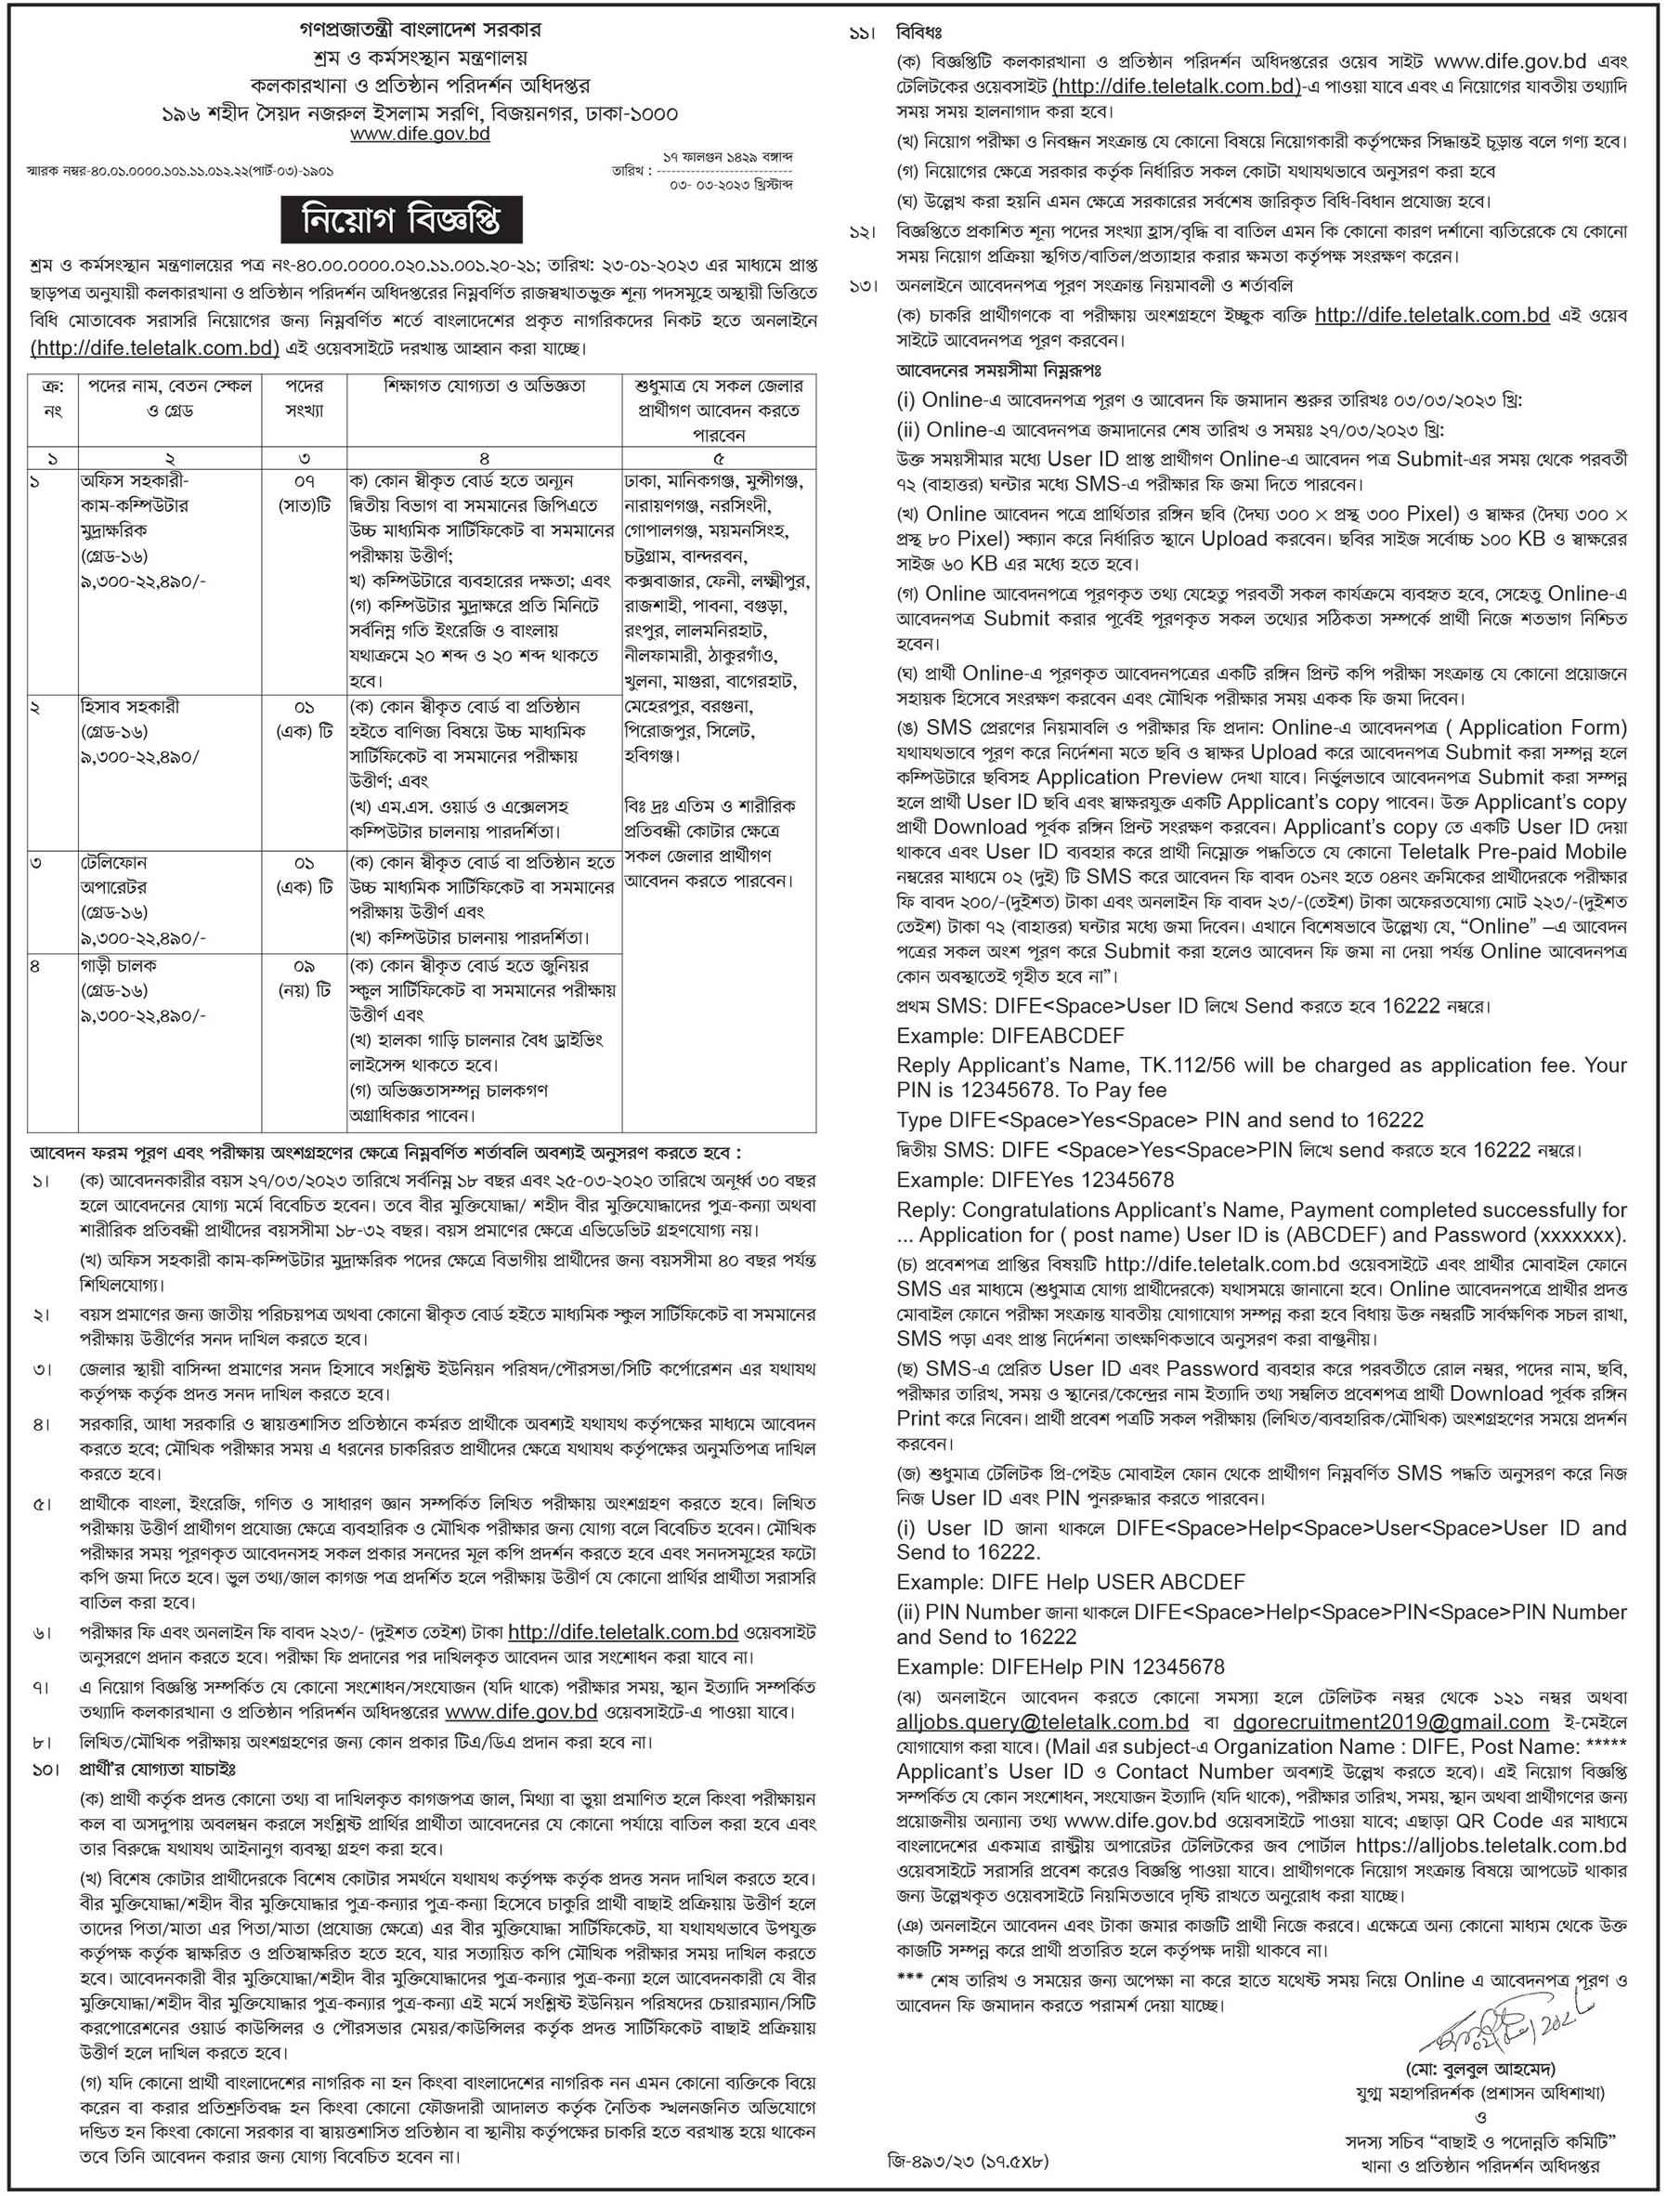 Ministry of Labour and Employment Job Circular 